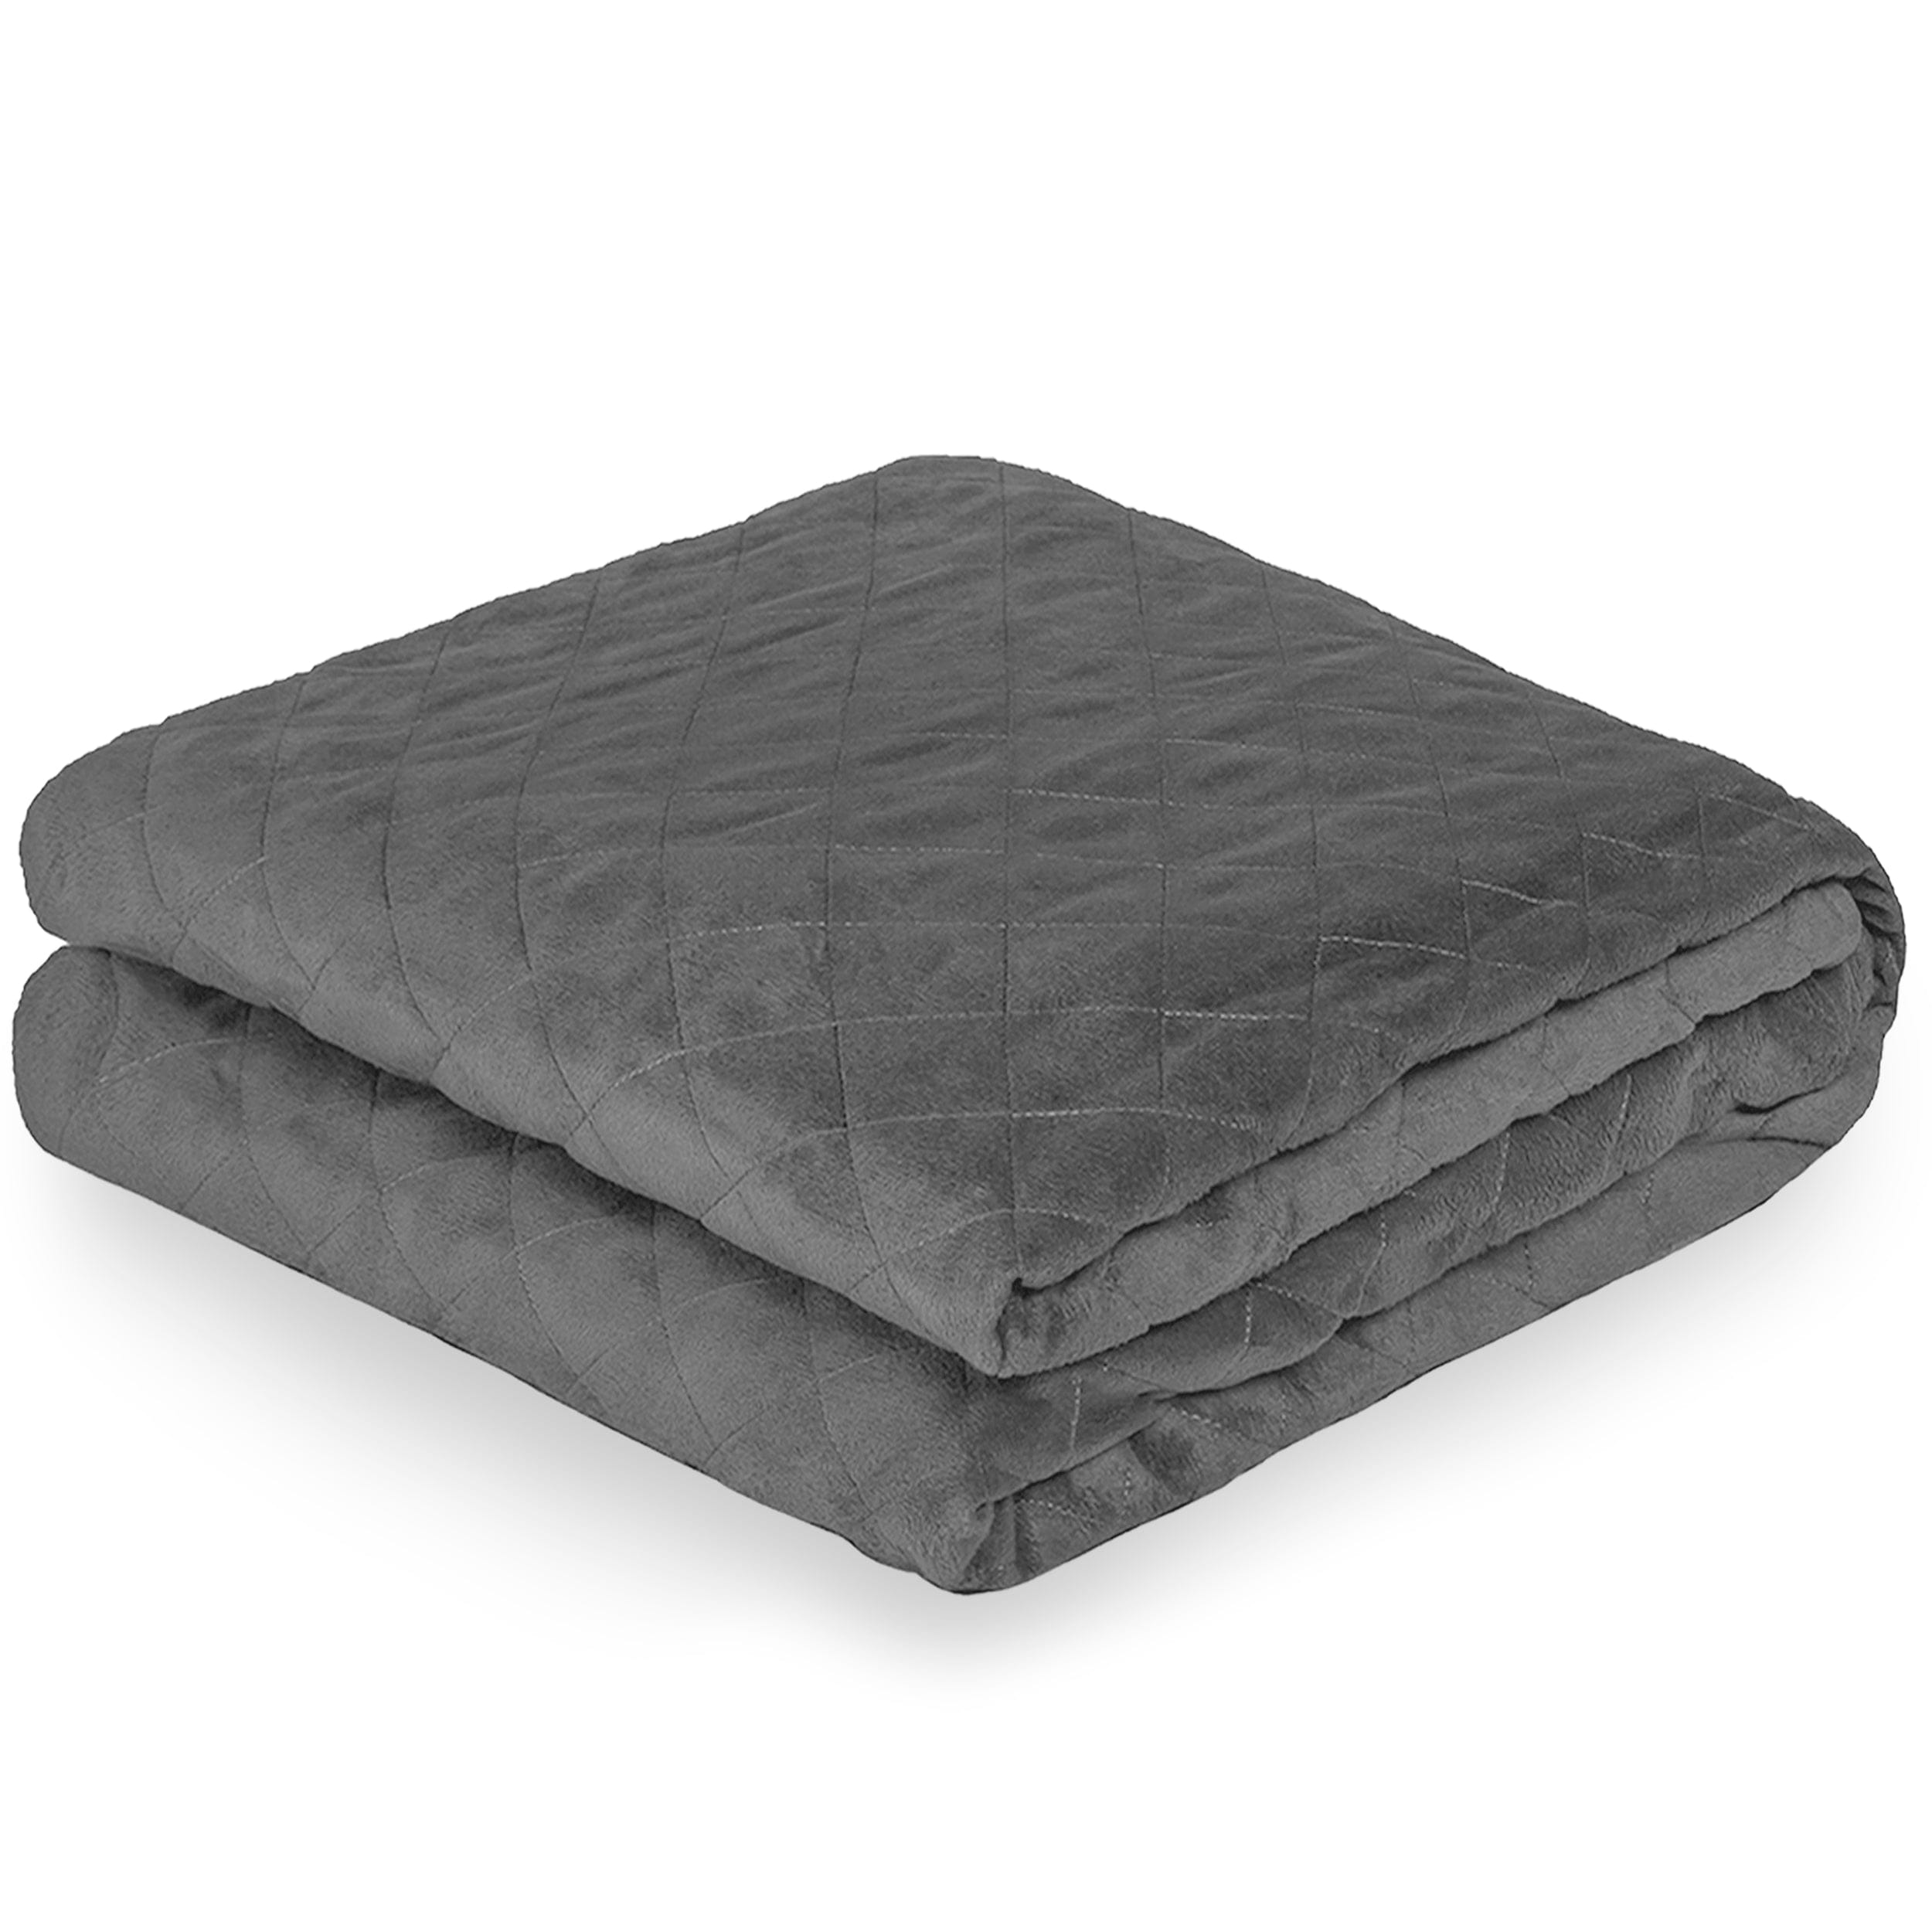 Grey weighted blanket cover folded neatly in a square